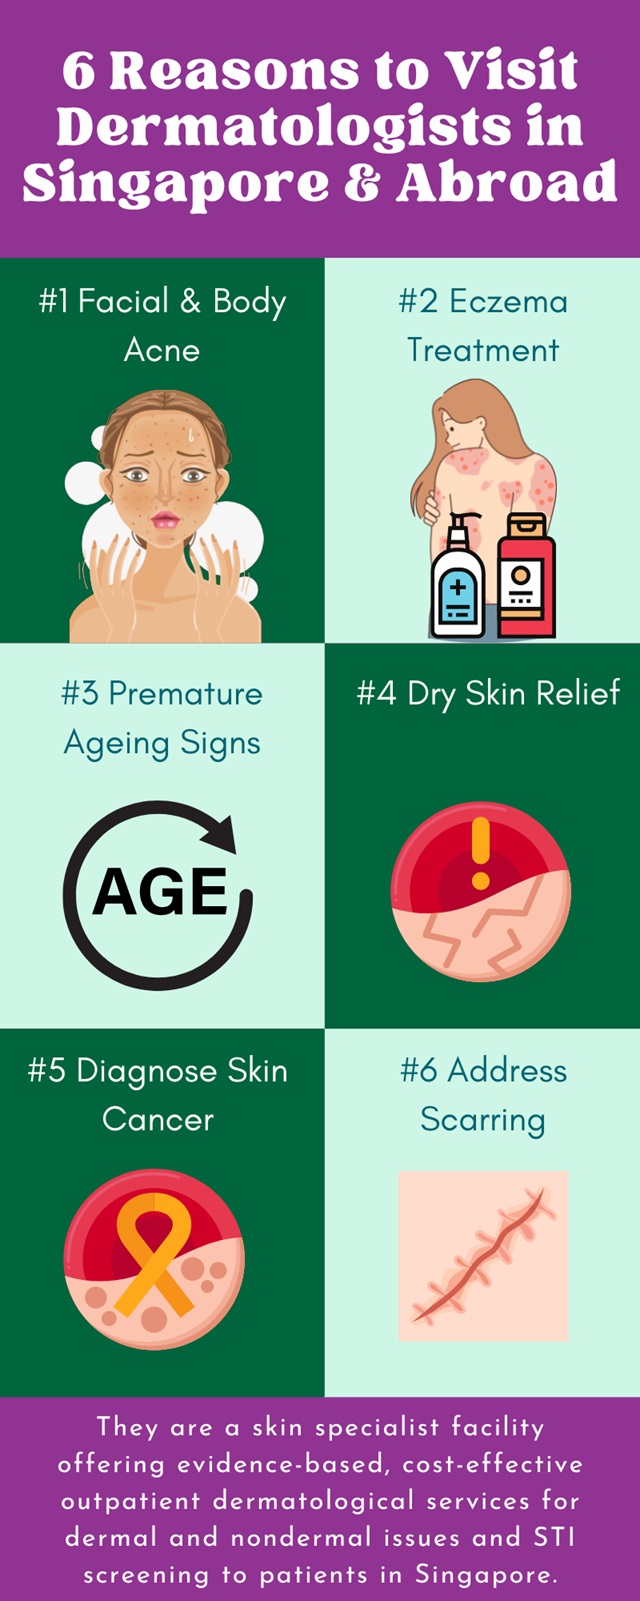 6 Reasons to Visit Dermatologists in Singapore & Abroad